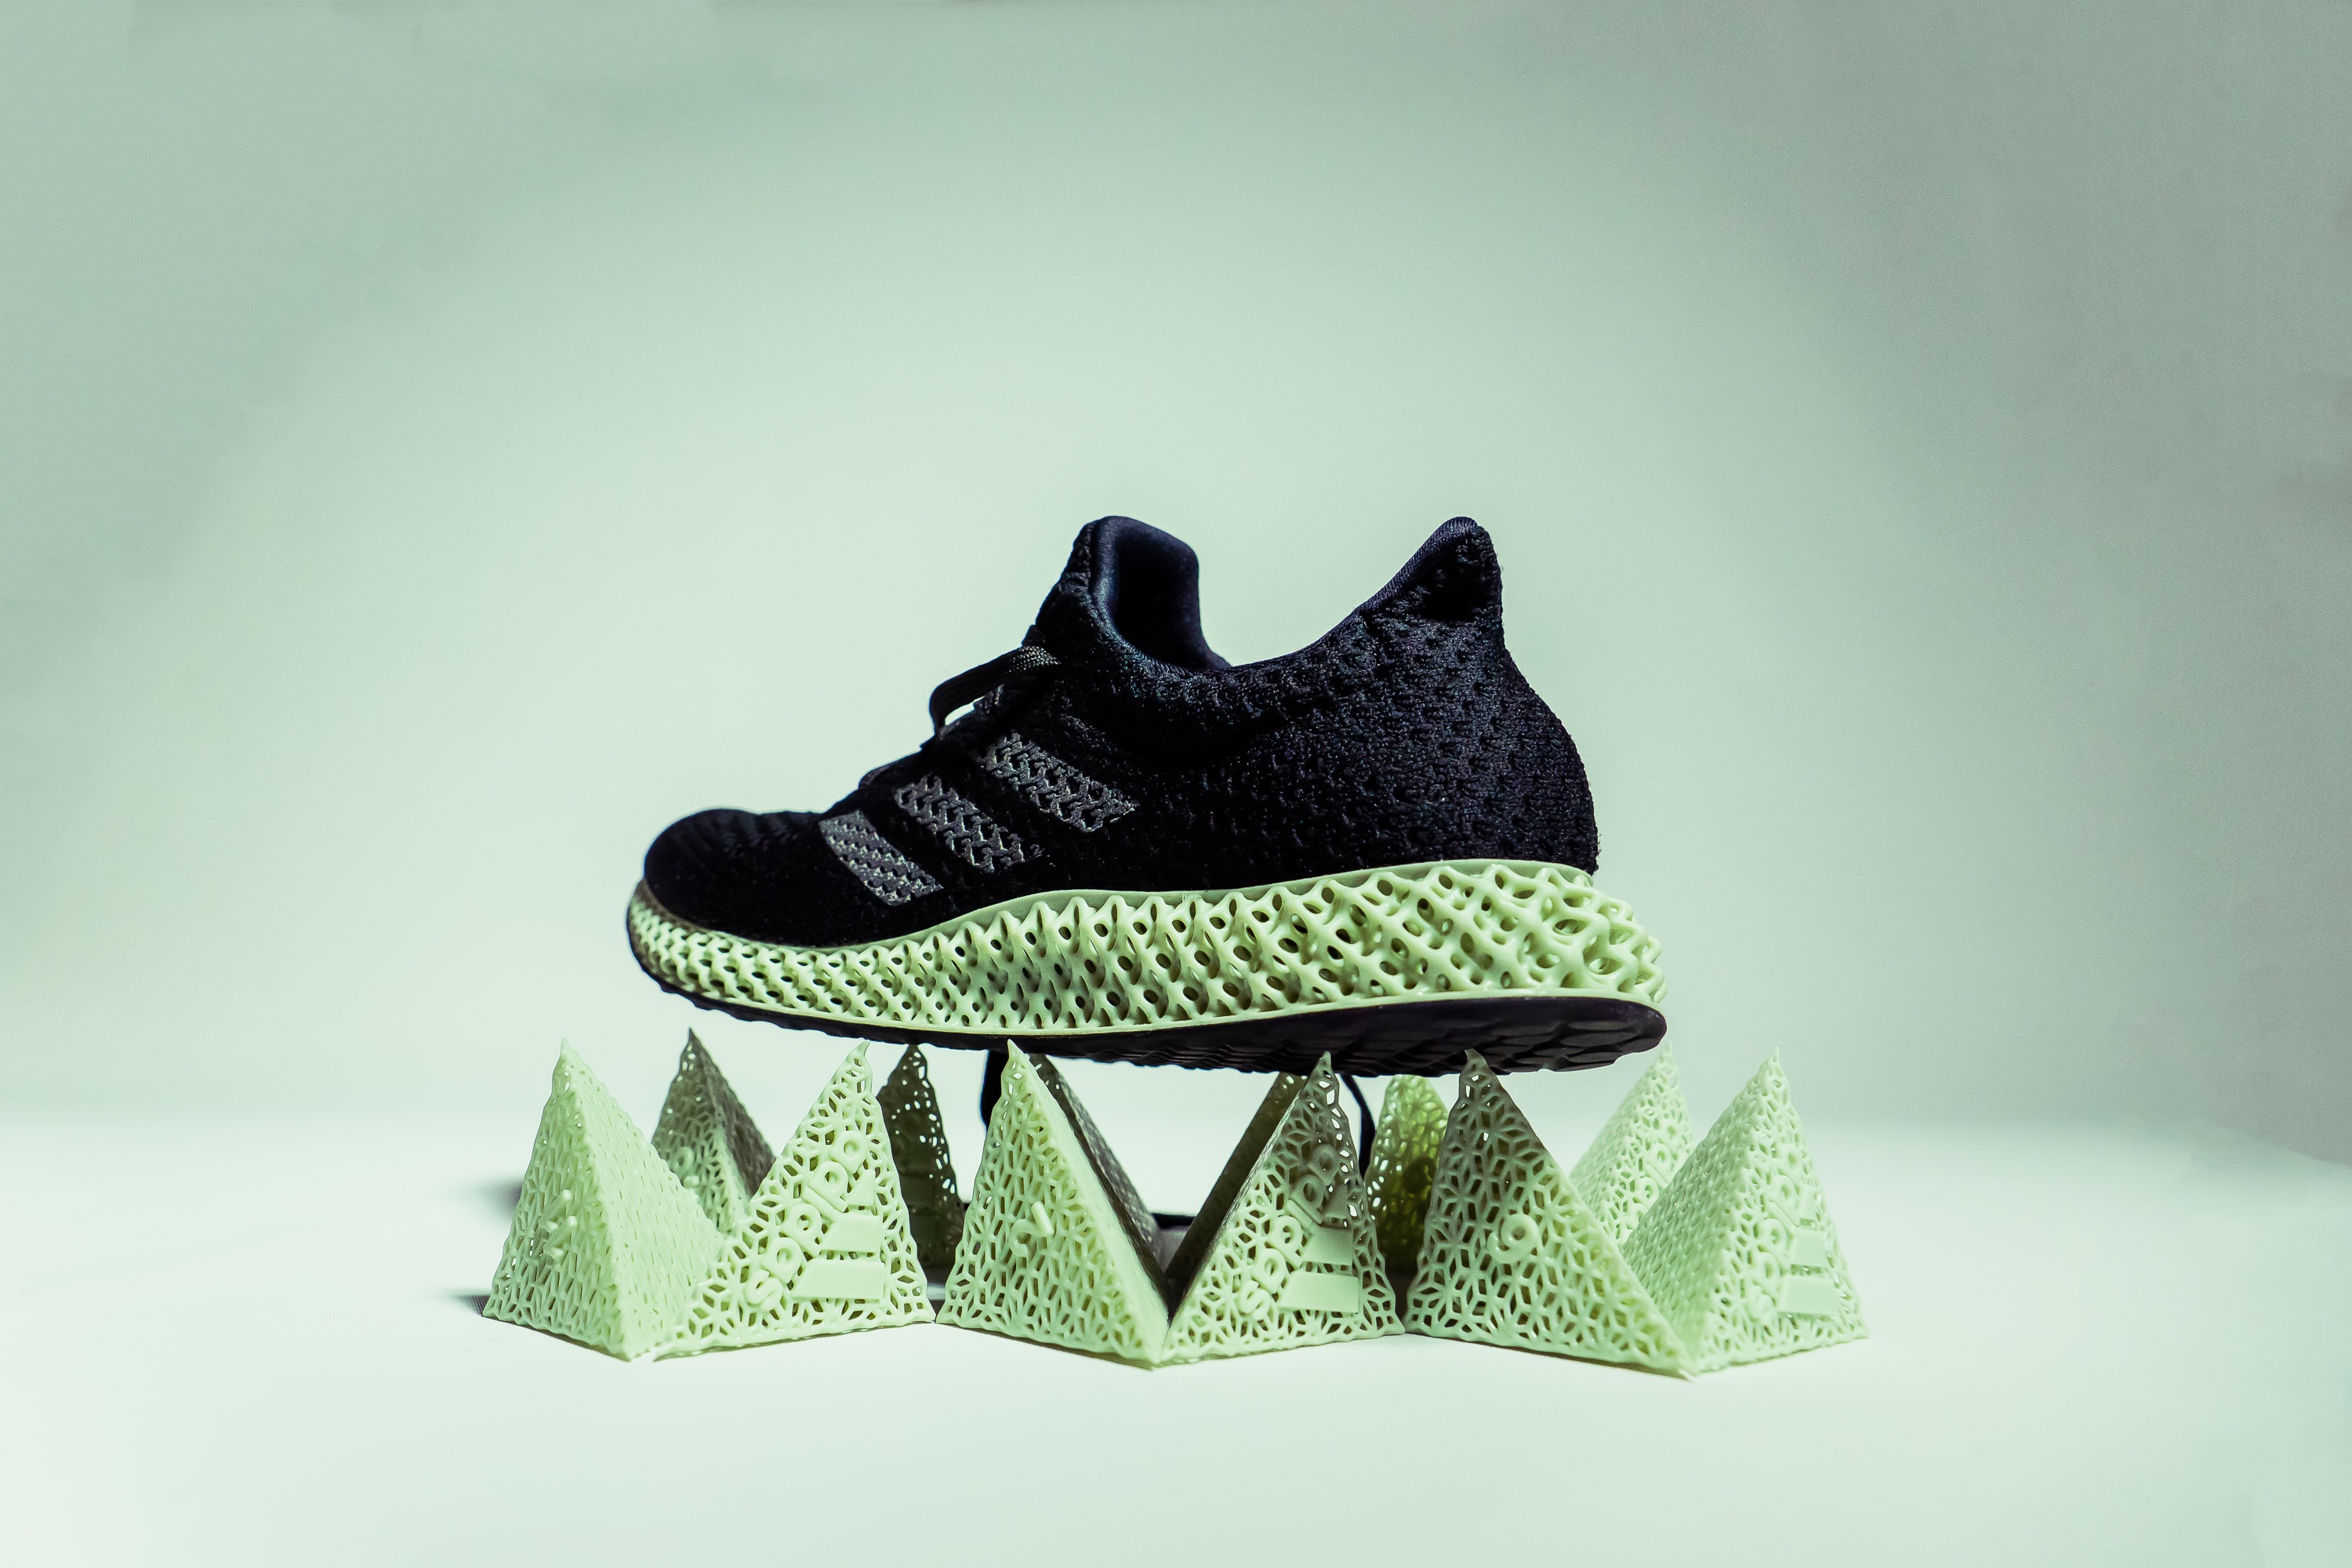 Packer reopening adidas futurecraft 4D giveaway